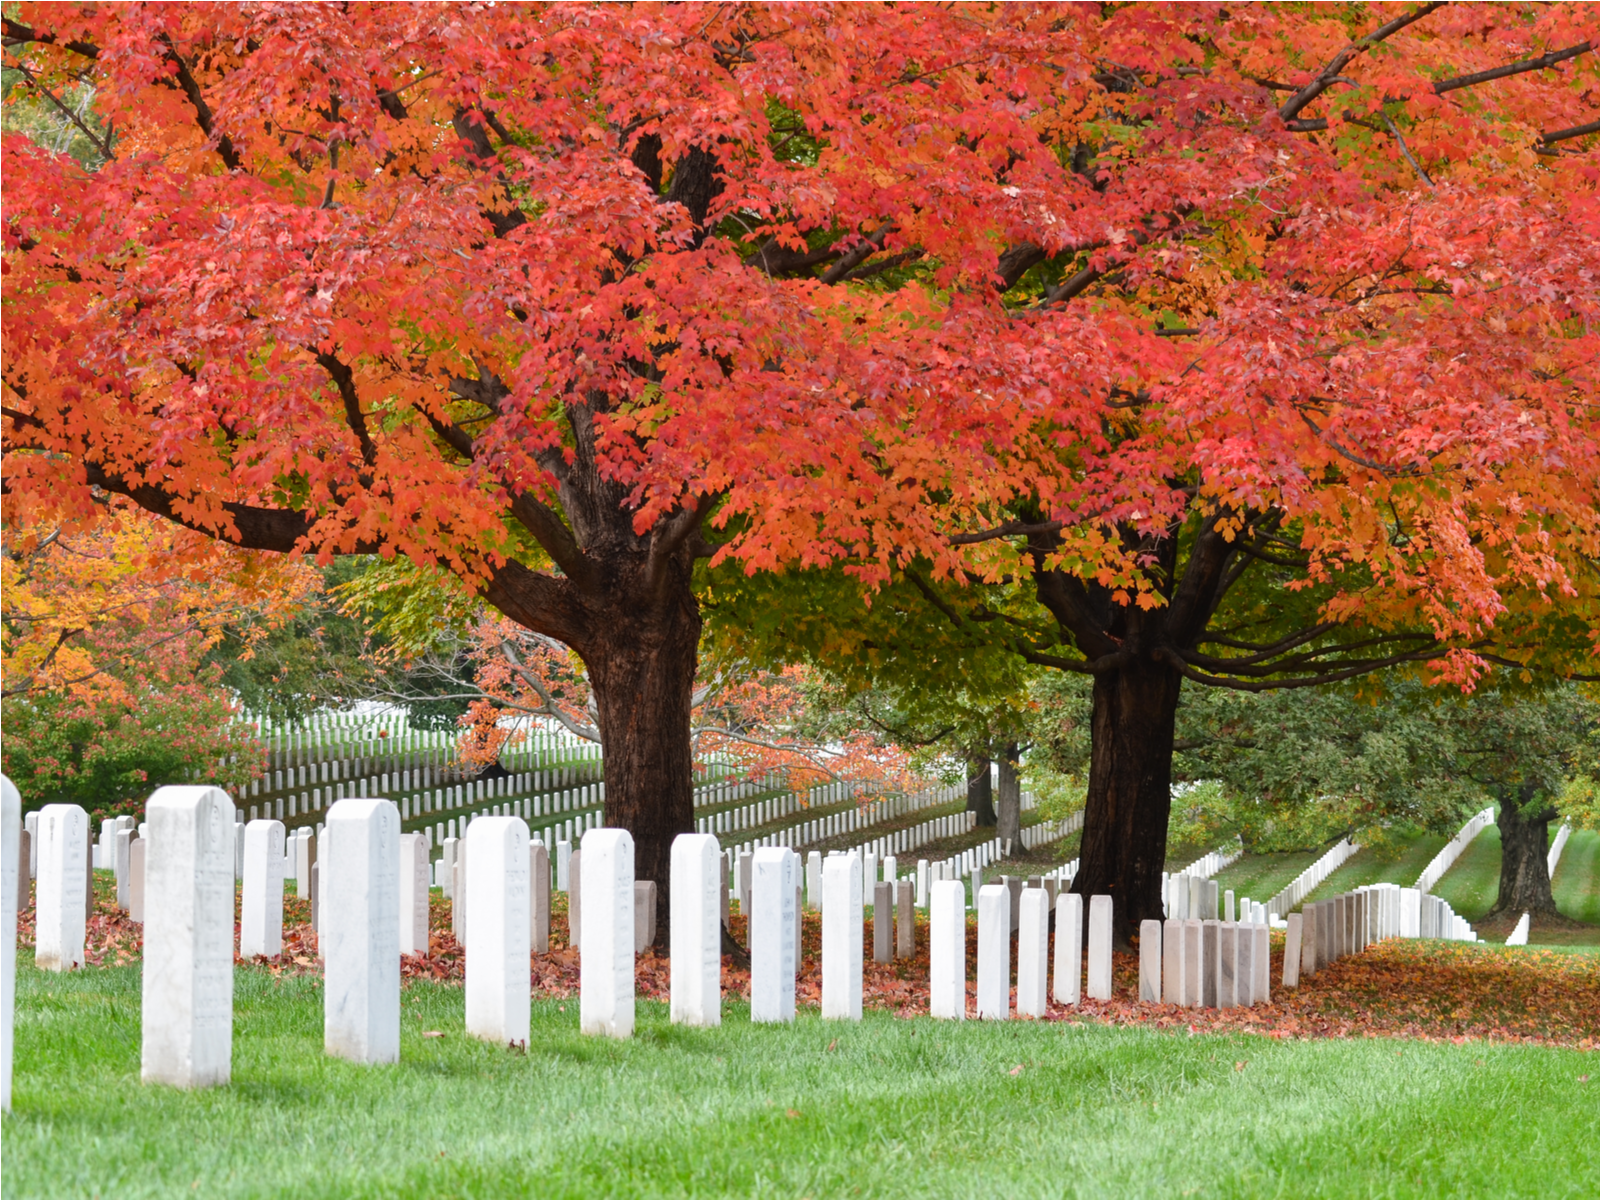 Hundred thousands of perfectly lined white tombstone of dead soldiers underneath vibrant colored trees at Arlington National Cemetery on an Autumn season, visiting them is one of the things to do in Virginia